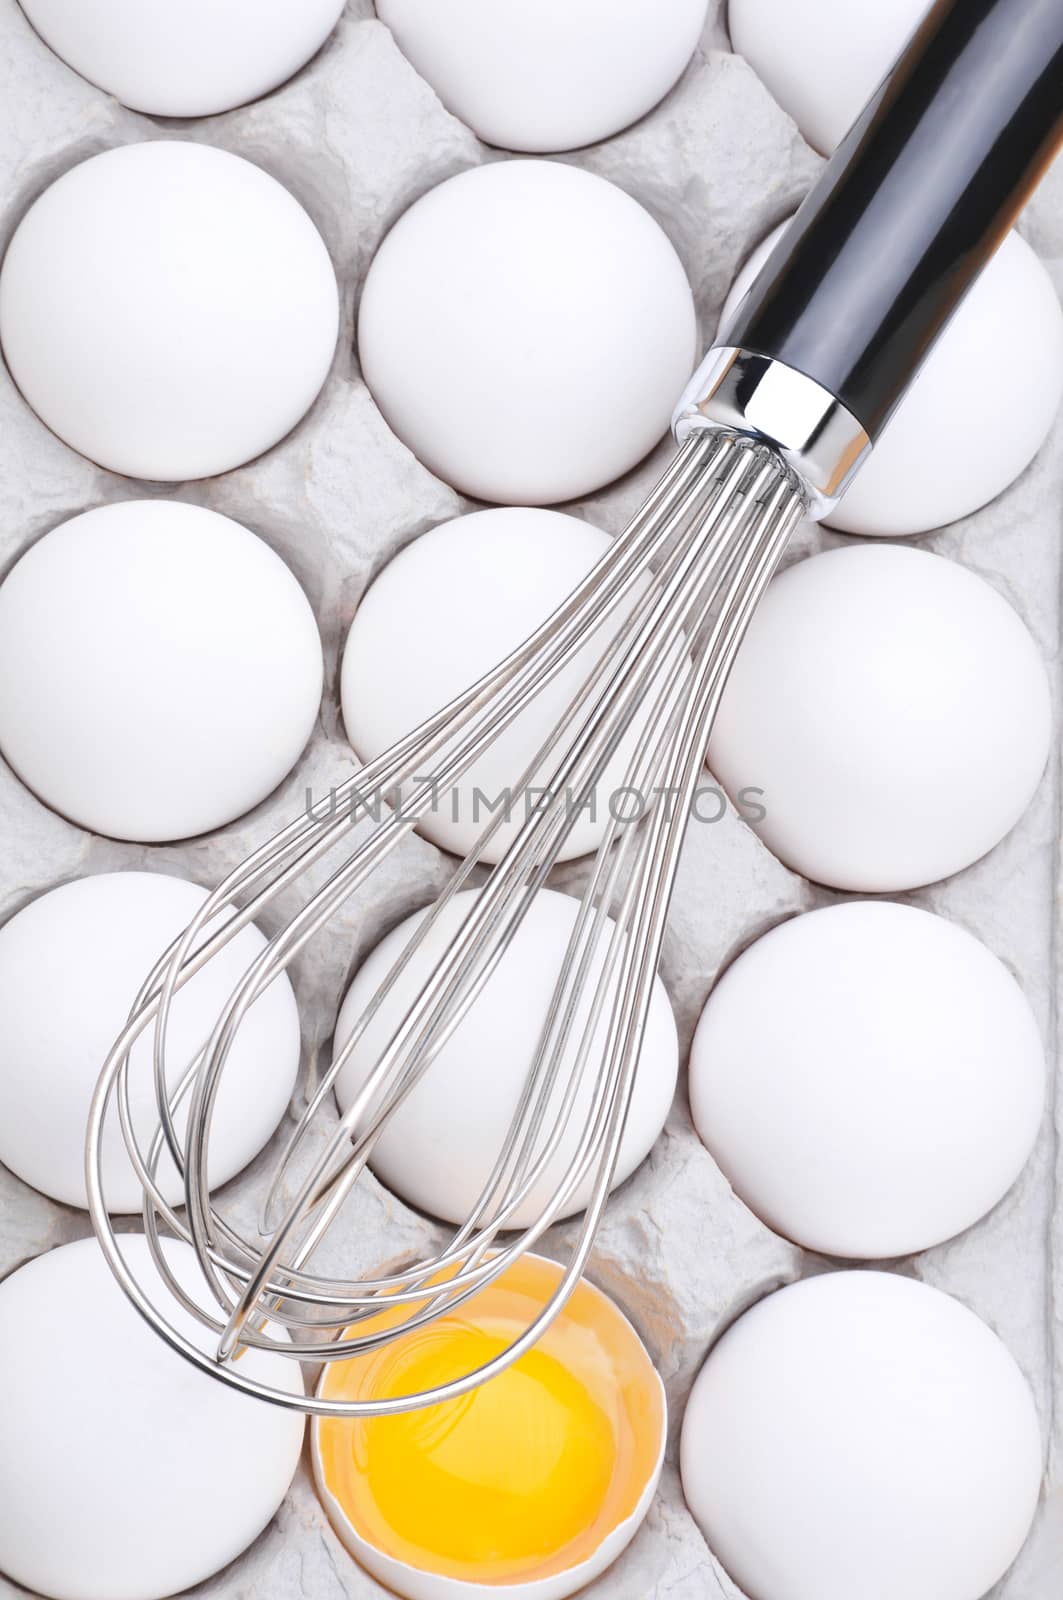 Closeup of a whisk laying across a carton of eggs, with one broken exposing the yolk. Vertical format filling the frame. This image can be easily rotated to a horizontal orientation to fit your layout.